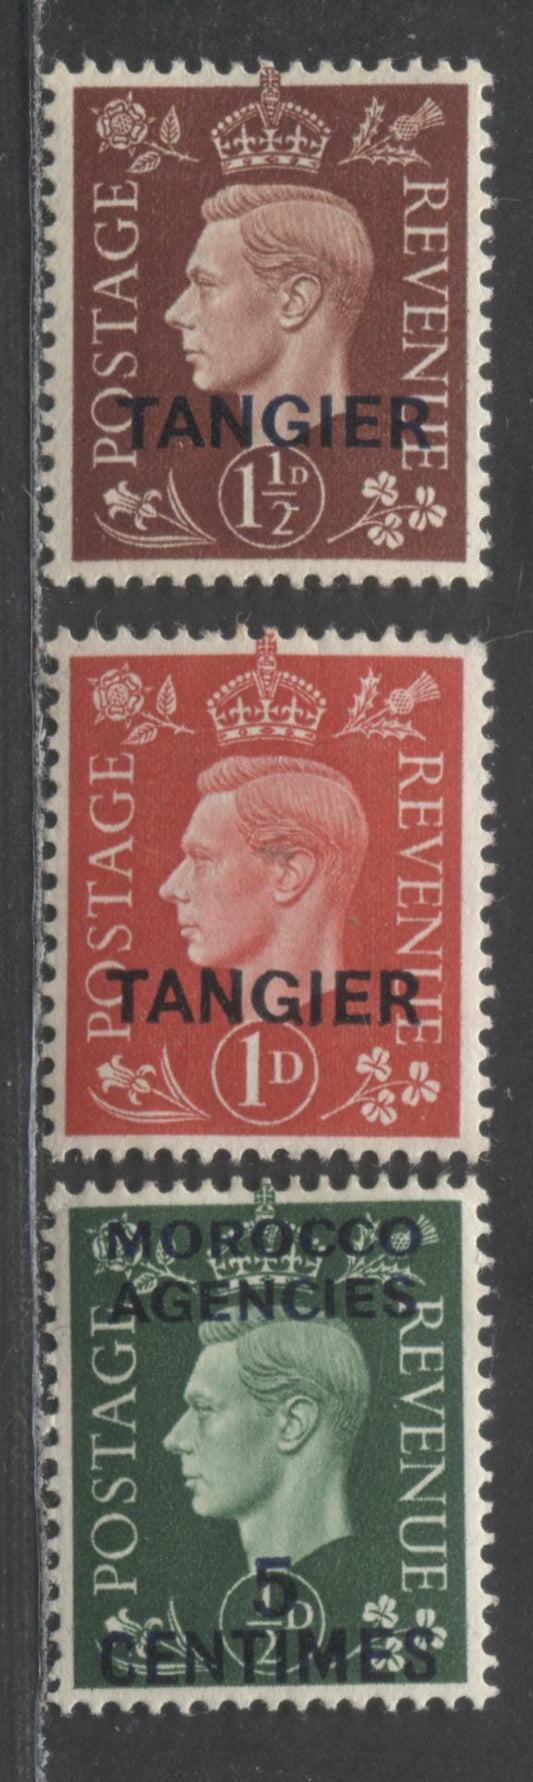 Morocco Agencies SC#515-517 1/2d, 1d, 1 1/2d 1937 Tangier Overprints On King George VI Issue, The Only Values From The Dark Color Set To Be Overprinted, 3 VFOG Singles, Click on Listing to See ALL Pictures, 2022 Scott Classic Cat. $35.5 USD